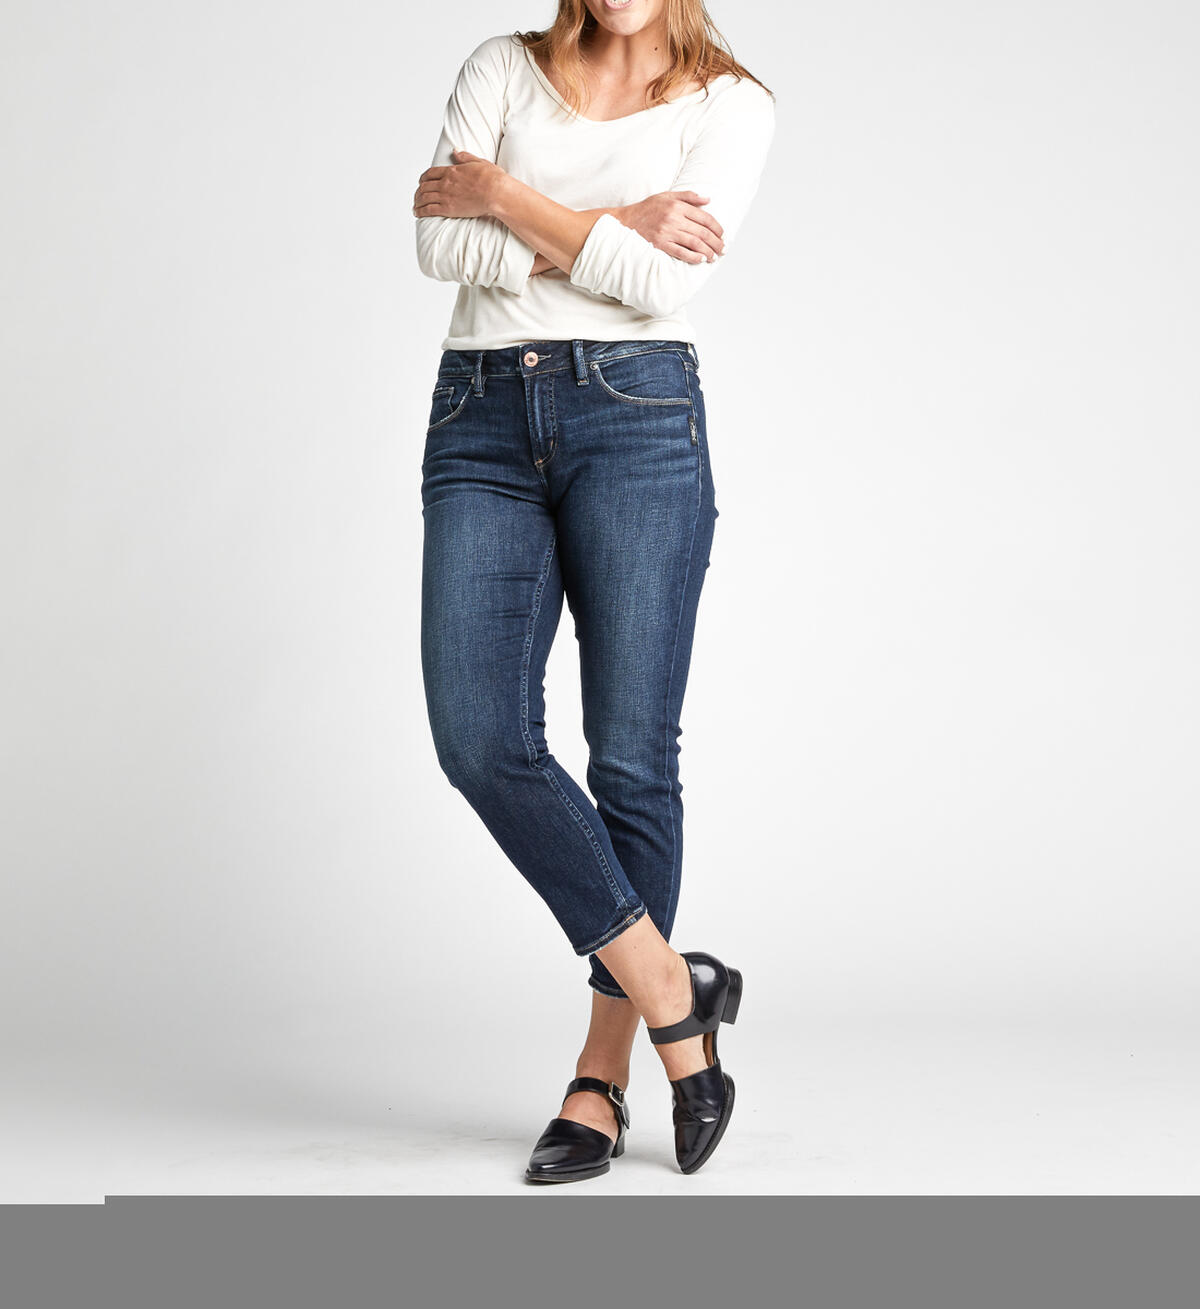 Avery High-Rise Curvy Skinny Crop Jeans, , hi-res image number 7